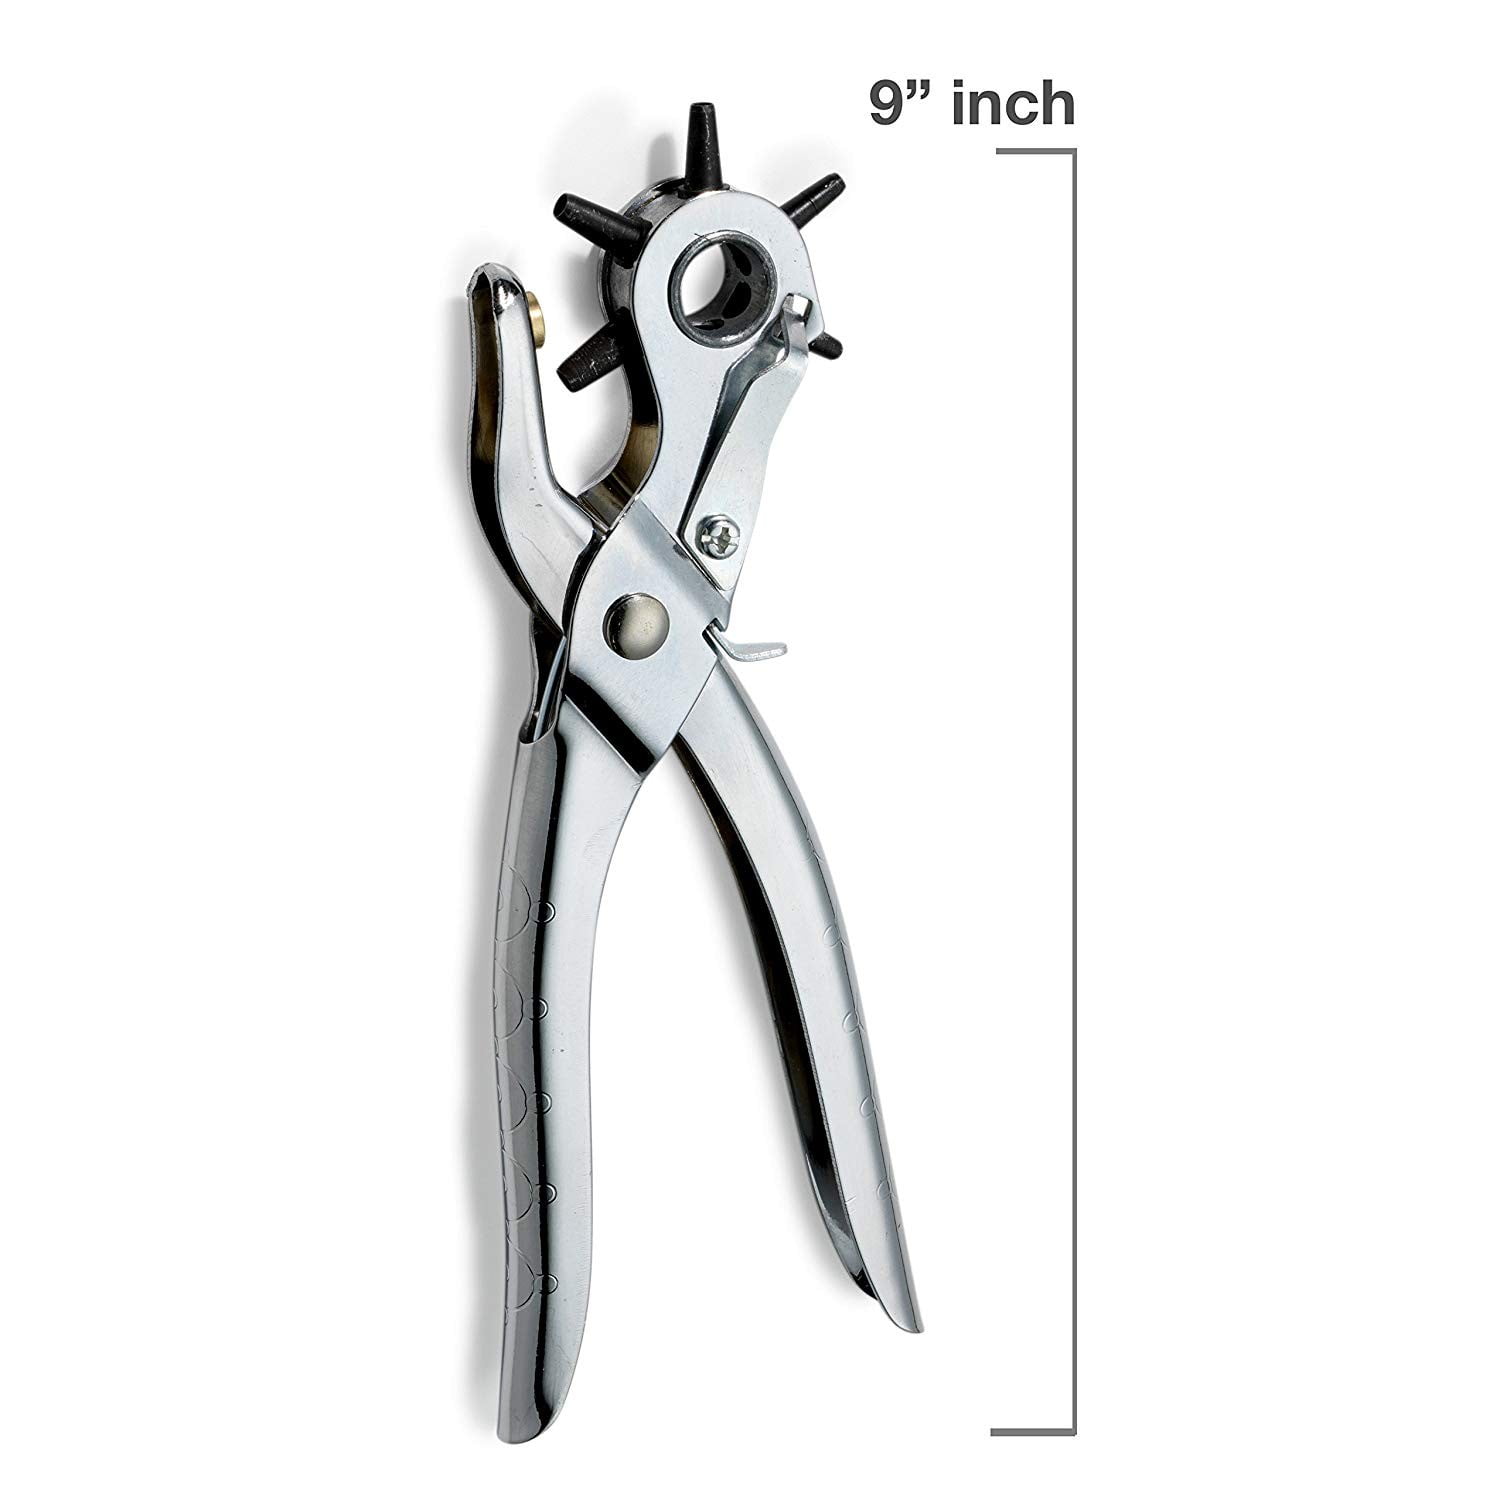 2PC/SET Revolving Belt Leather Hole Punch Pliers And Shoe Cloth Eyelet  Setter Setting Fastener Press With 100PCS Free Buttons